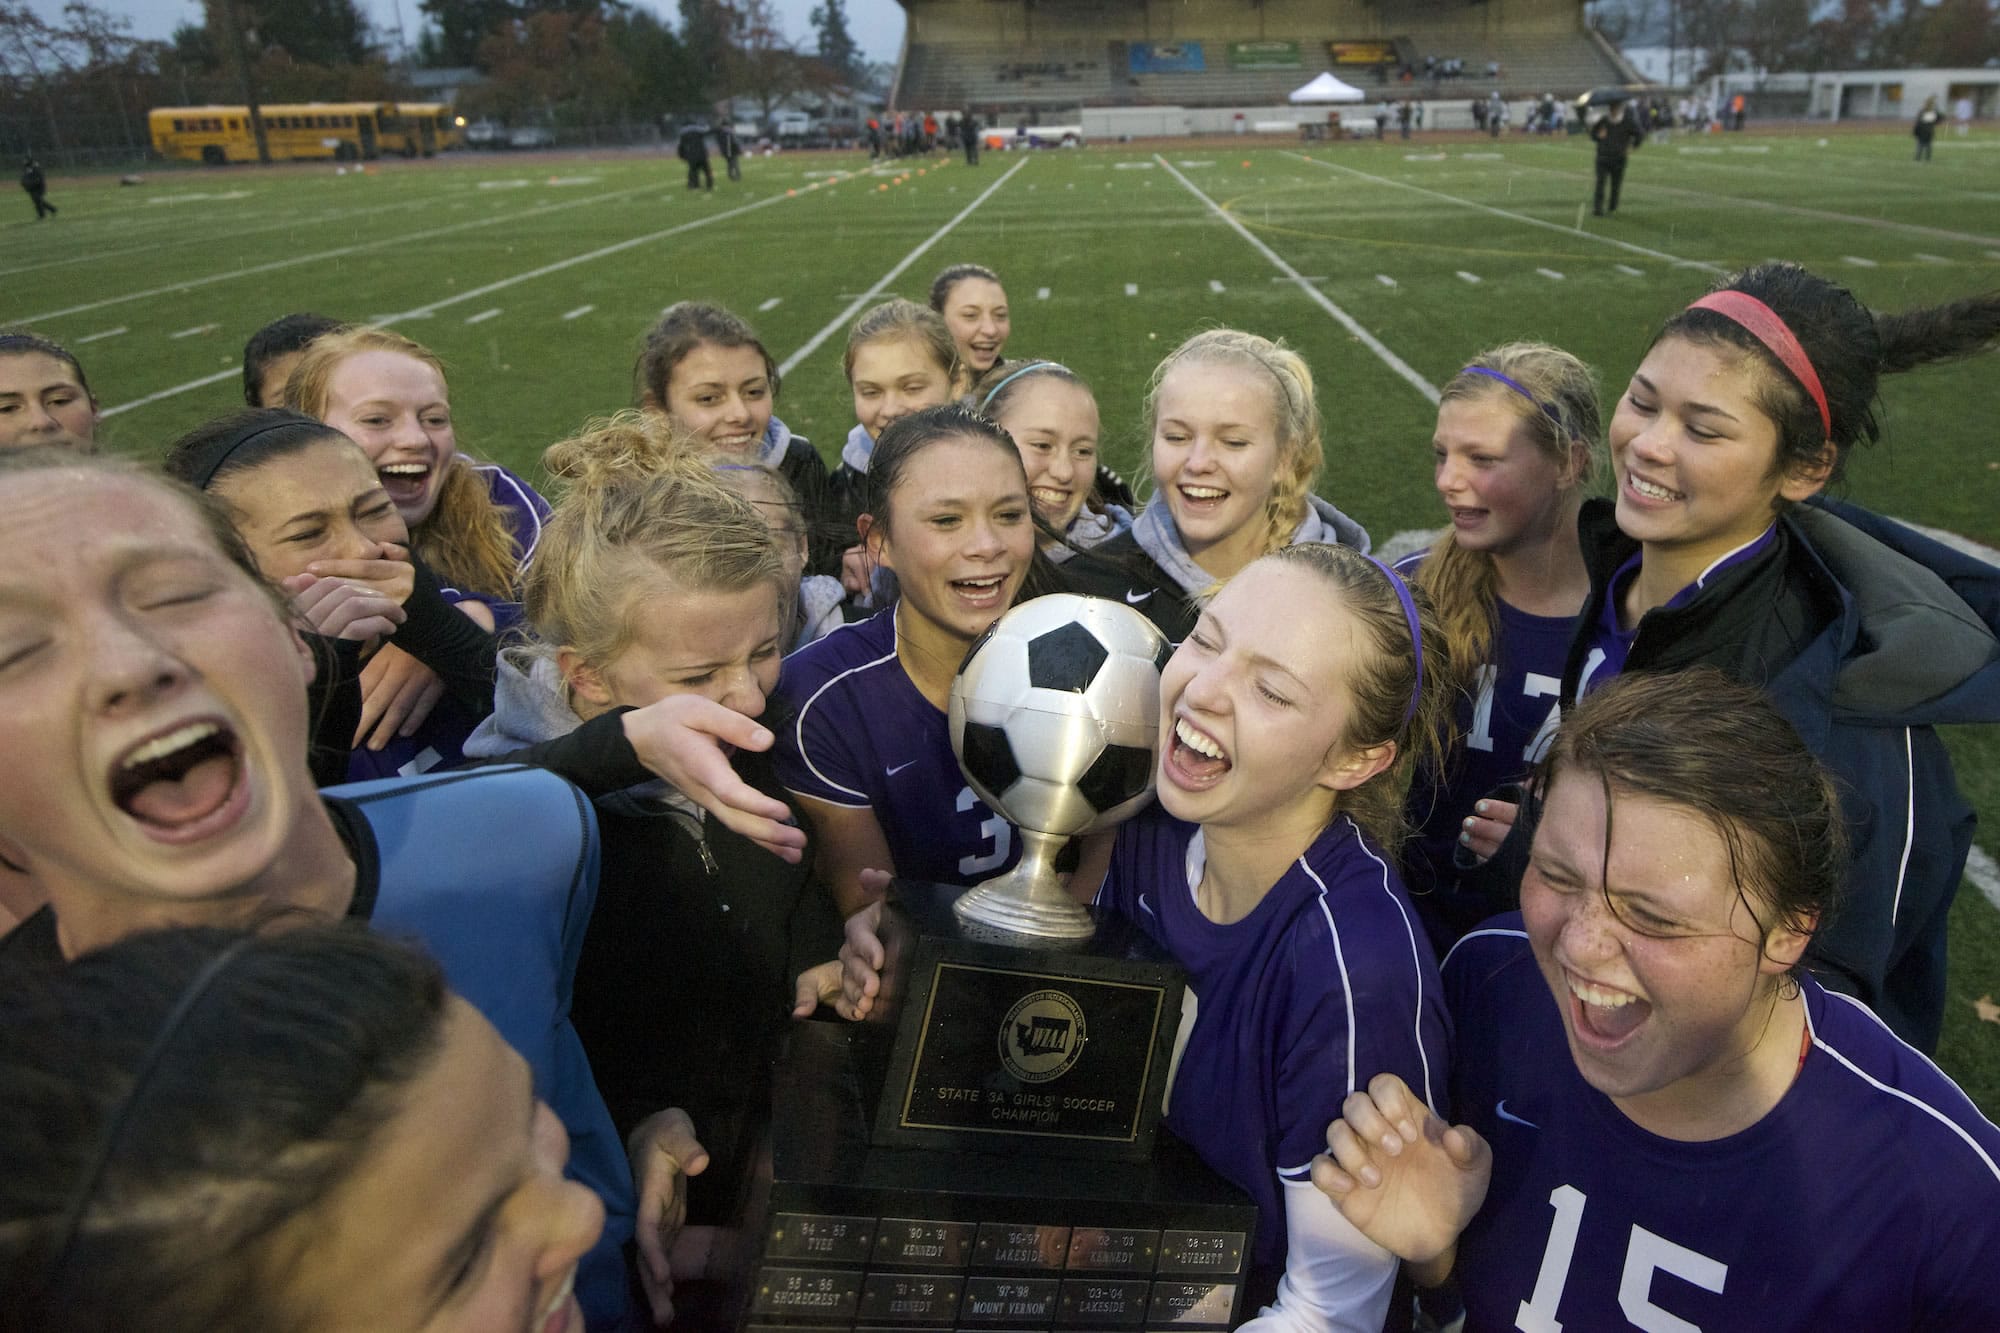 Columbia River players celebrate their 3A state soccer championship after defeating Mount Spokane 2-1 on Saturday at Sparks Stadium in Puyallup.